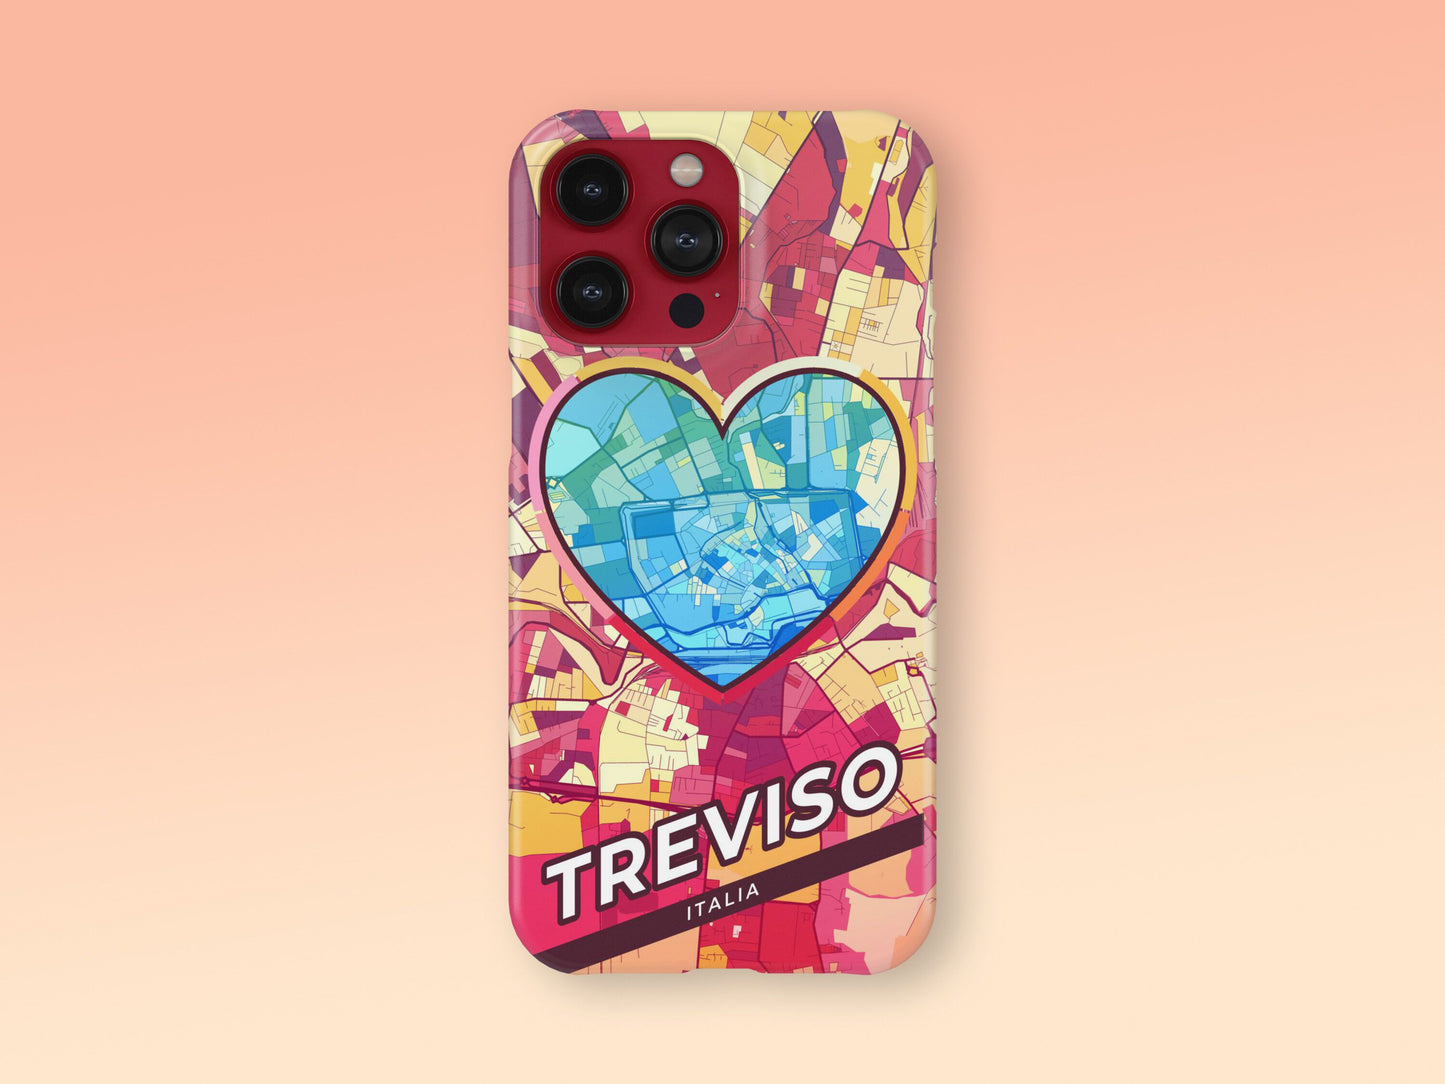 Treviso Italy slim phone case with colorful icon 2